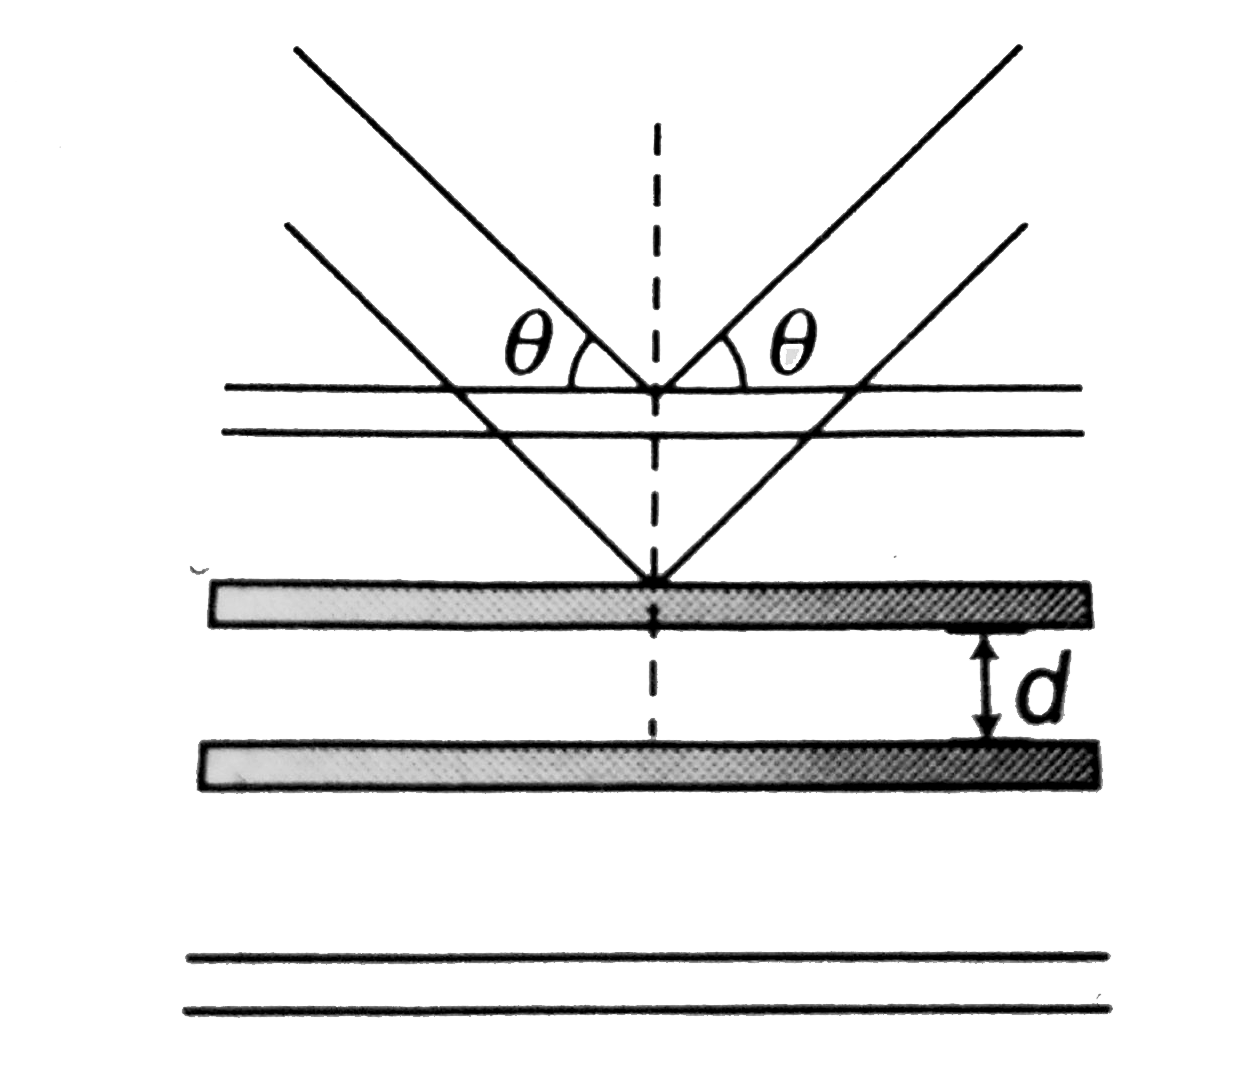 A beam with wavelength lambda falls on a stack of partially reflecting planes with separation d. The angle theta that the beam should make with planes so that the beams reflected from successive planes may interfere constructively is (where n=1, 2, ...)